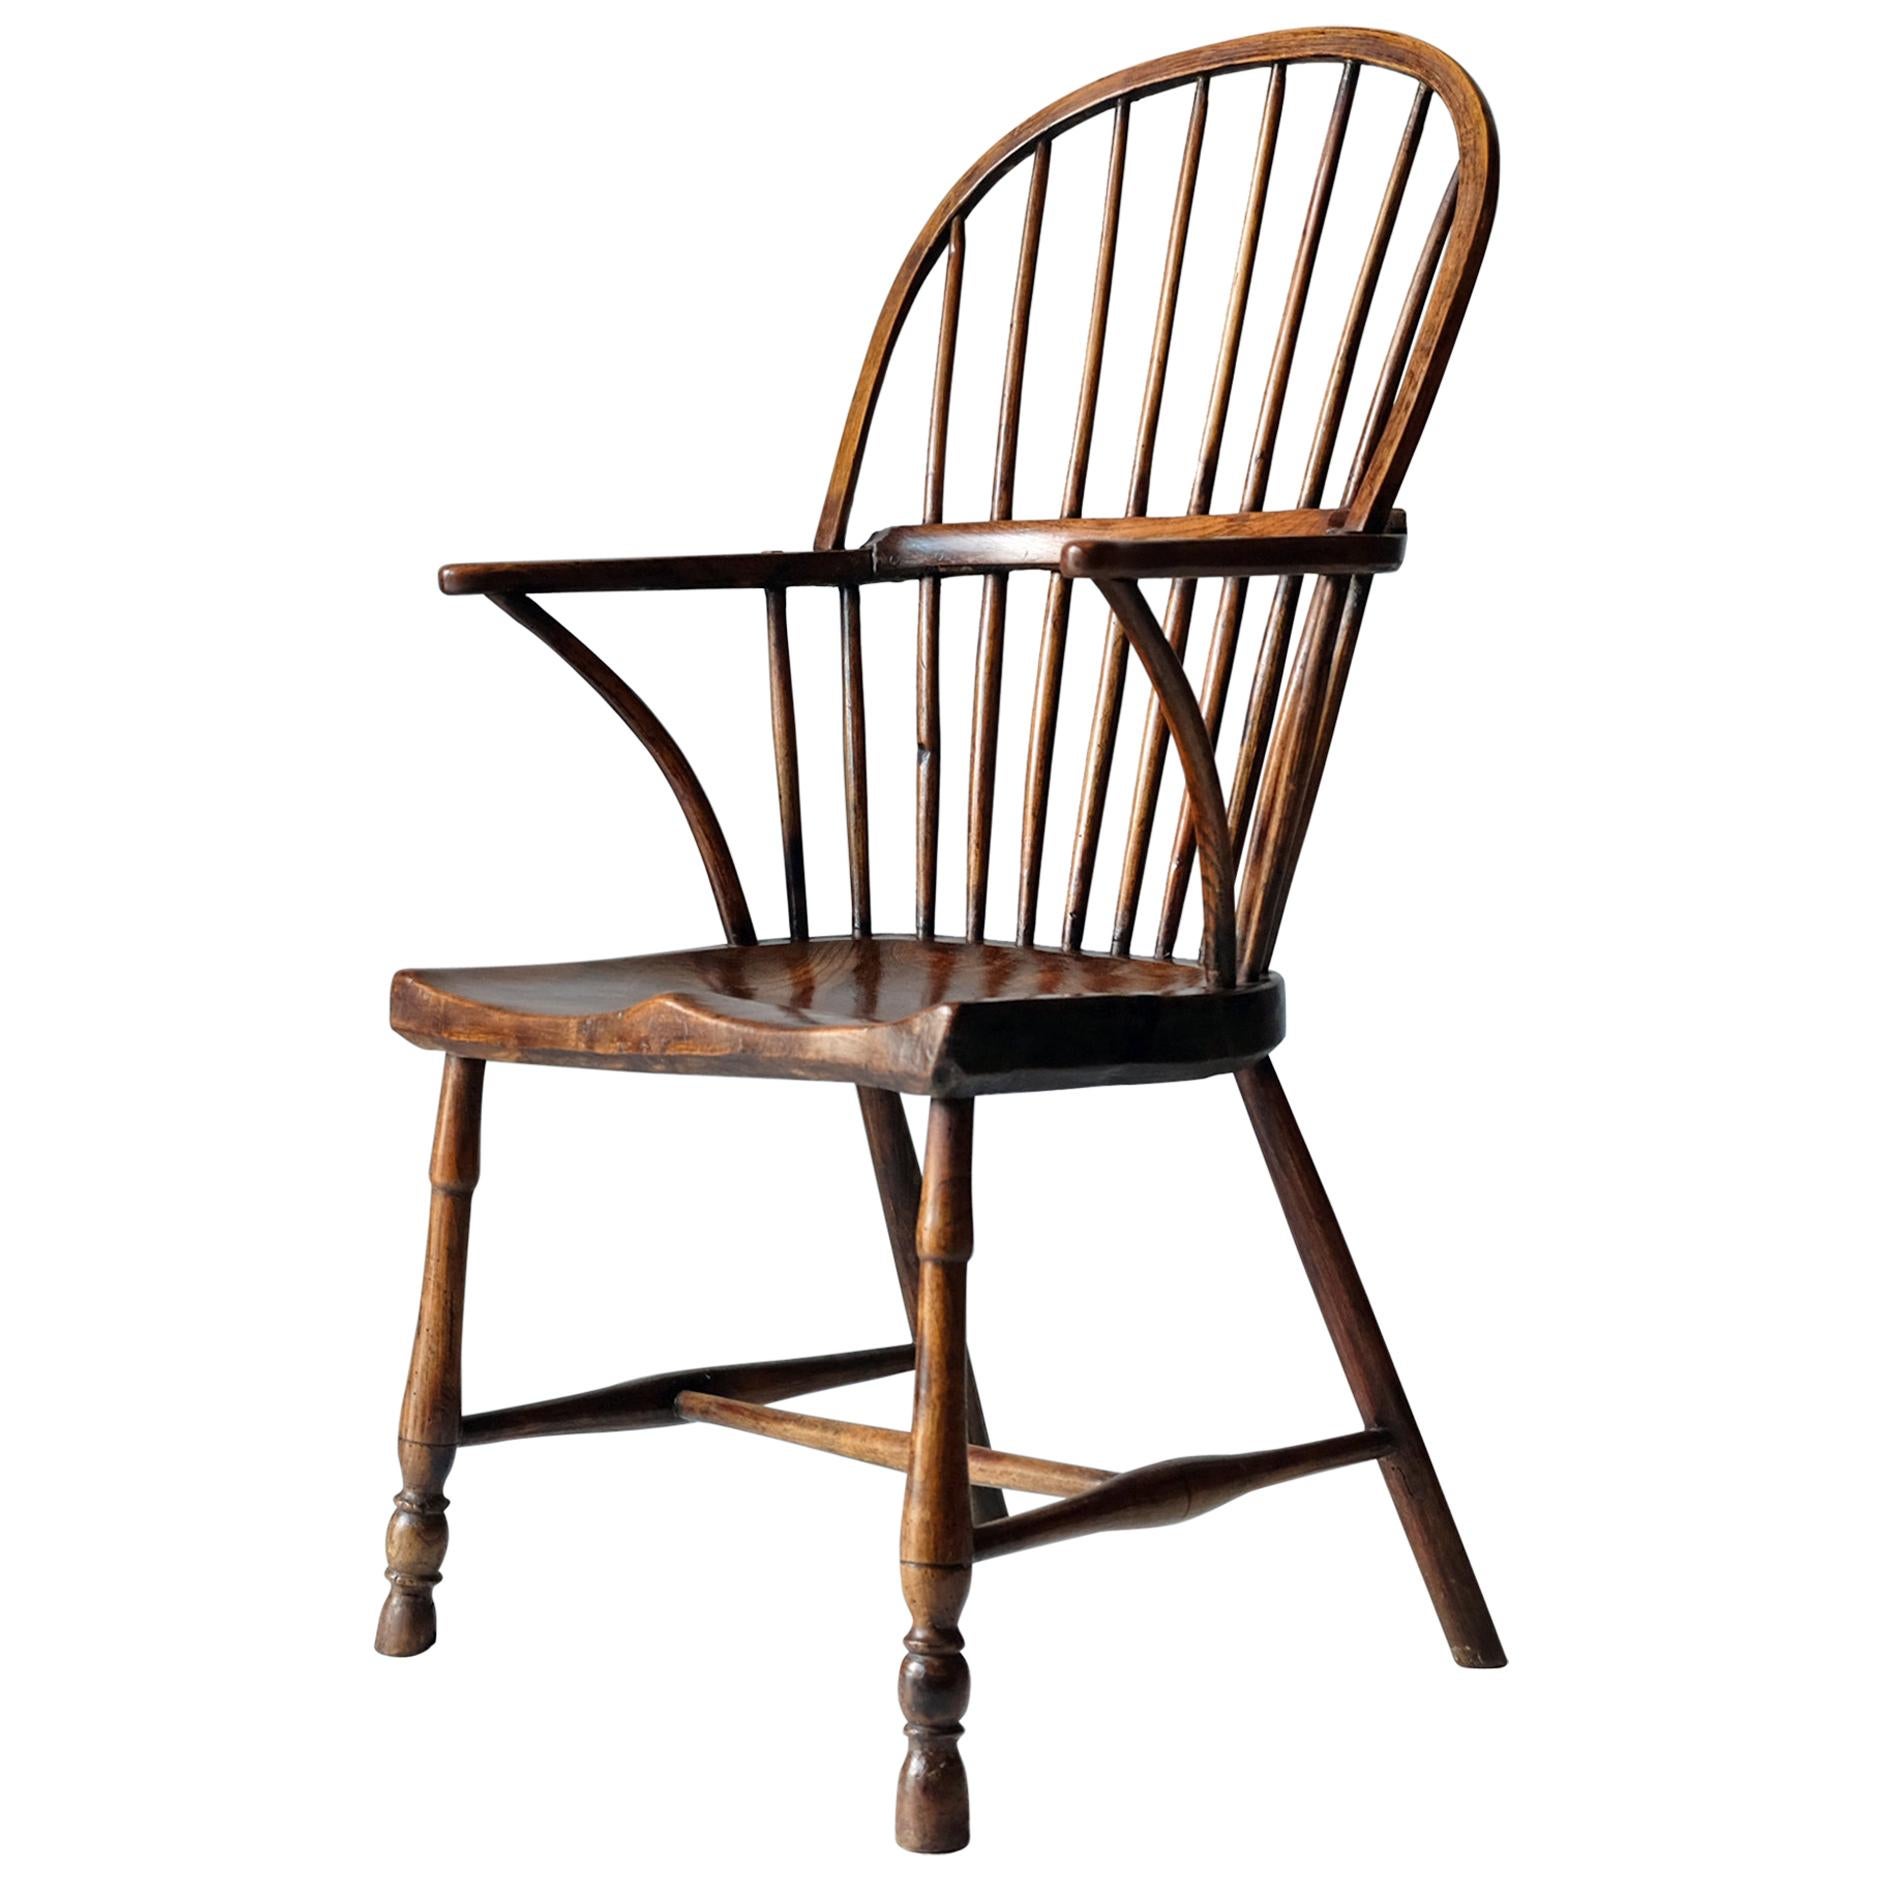 Simple Burr Elm Country Windsor Chair, Early 19th Century, Rustic, English